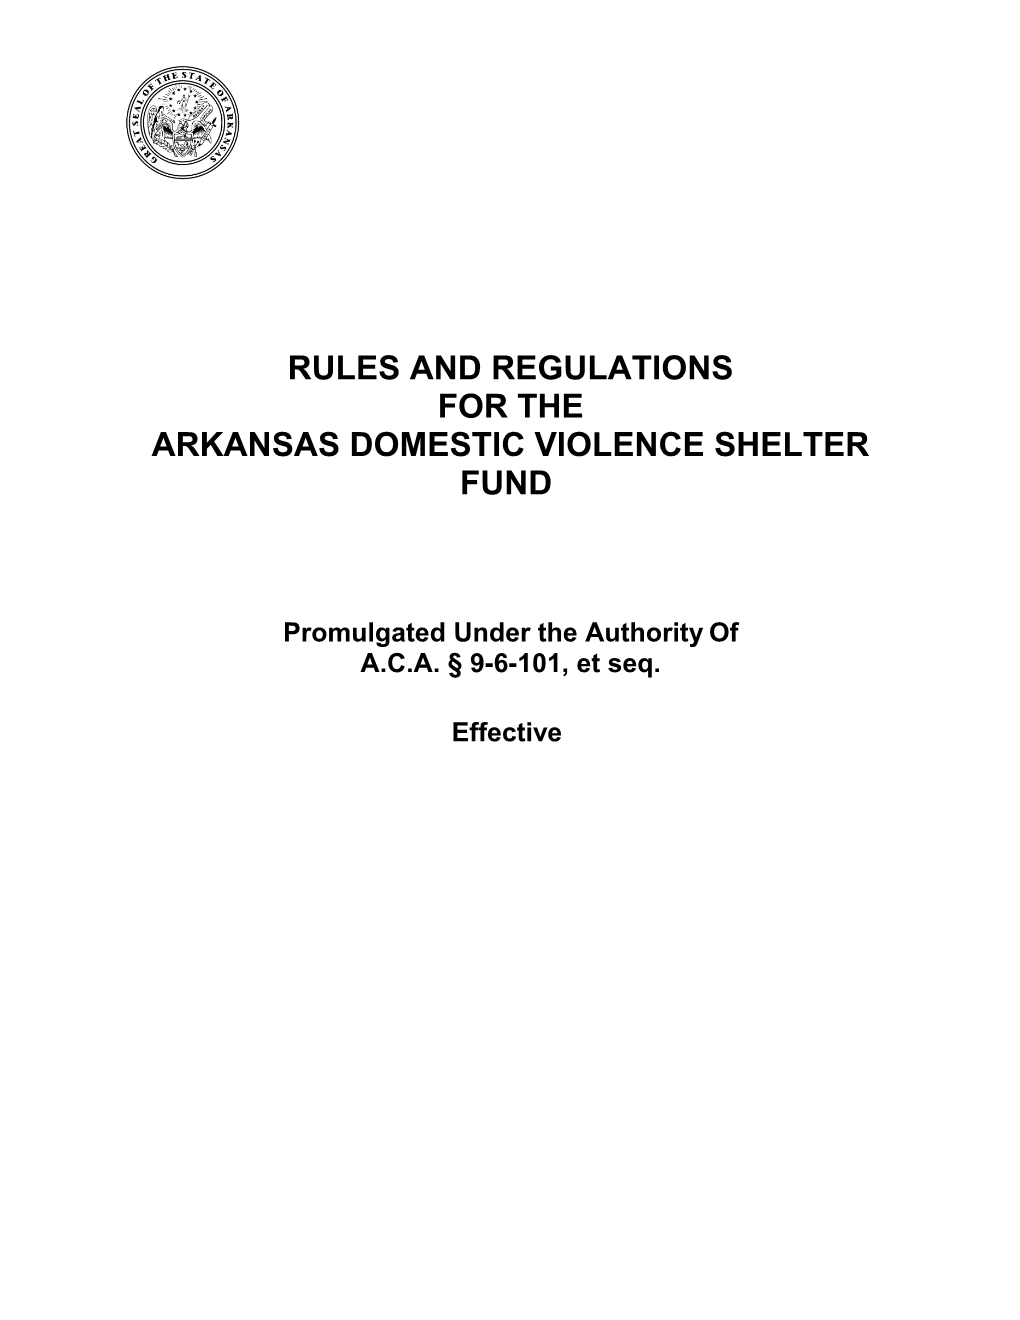 Proposed Rules for Arkansas Domestic Violence Shelter Fund